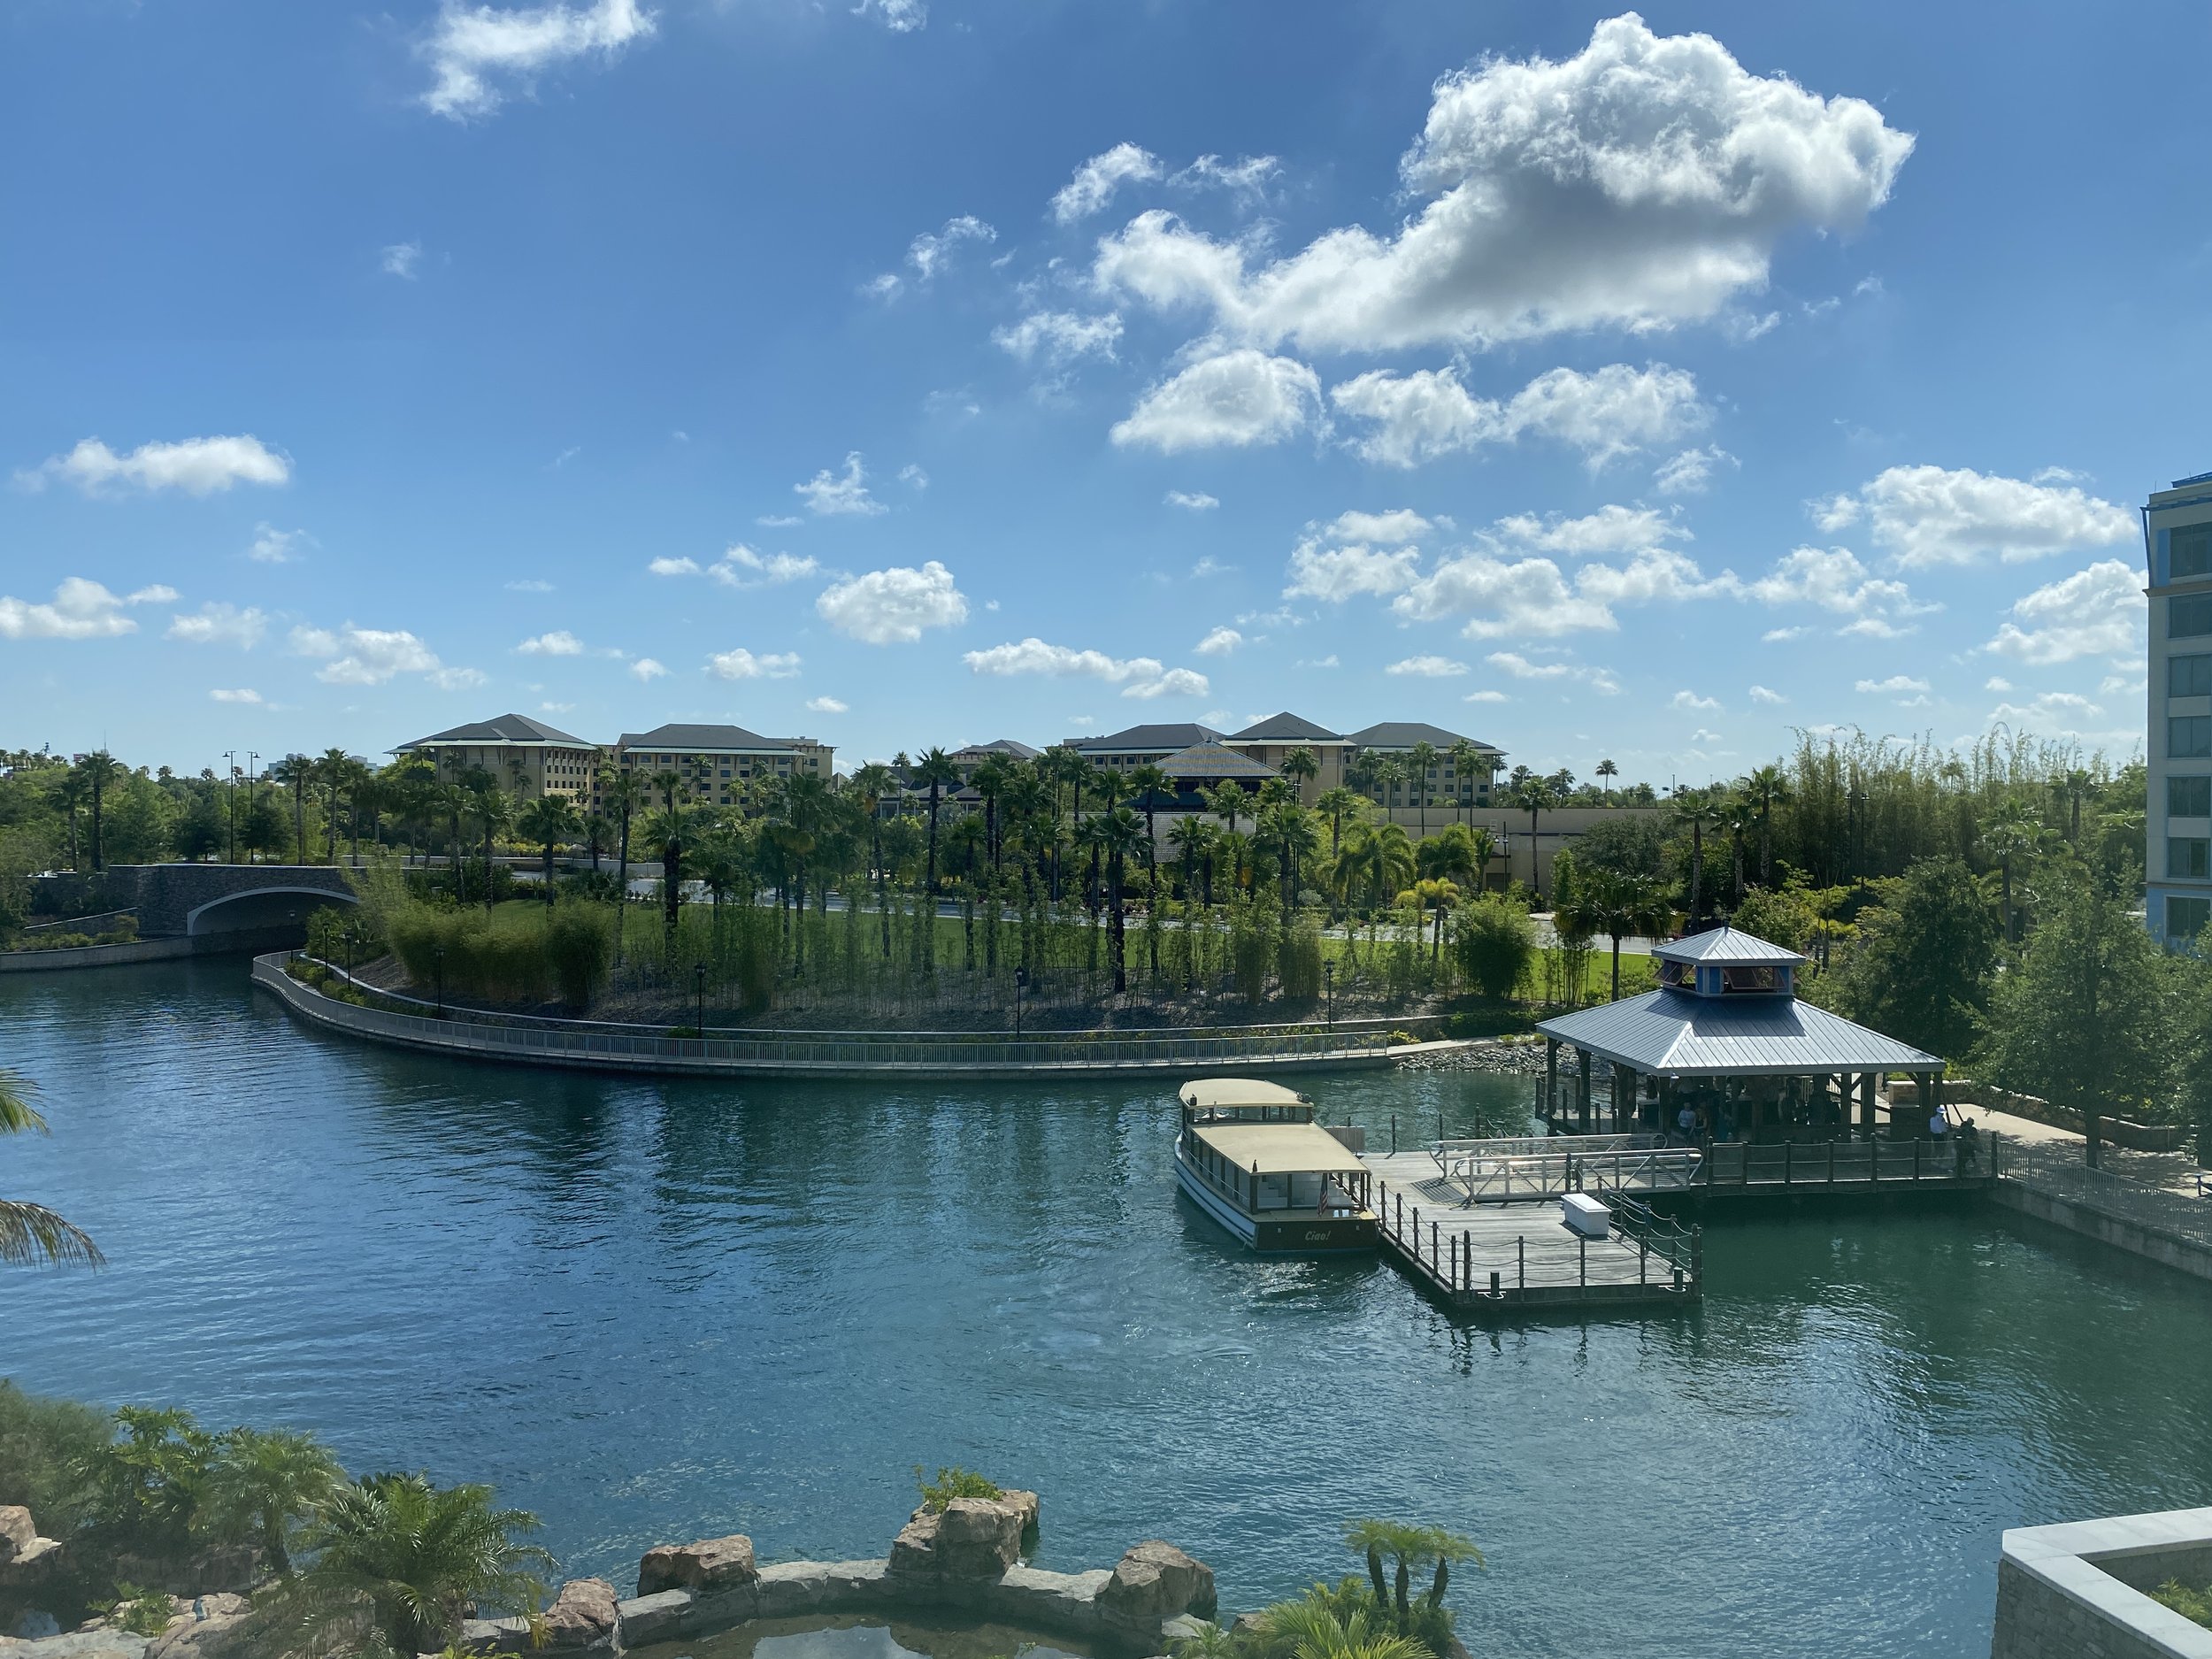  Complimentary boat transportation is provided to Universal City Walk, Islands of Adventure, and Universal Studios.  There is also a walking path.     It takes about 15 minutes to walk from Sapphire Falls to City Walk and the theme parks.     Bus tra